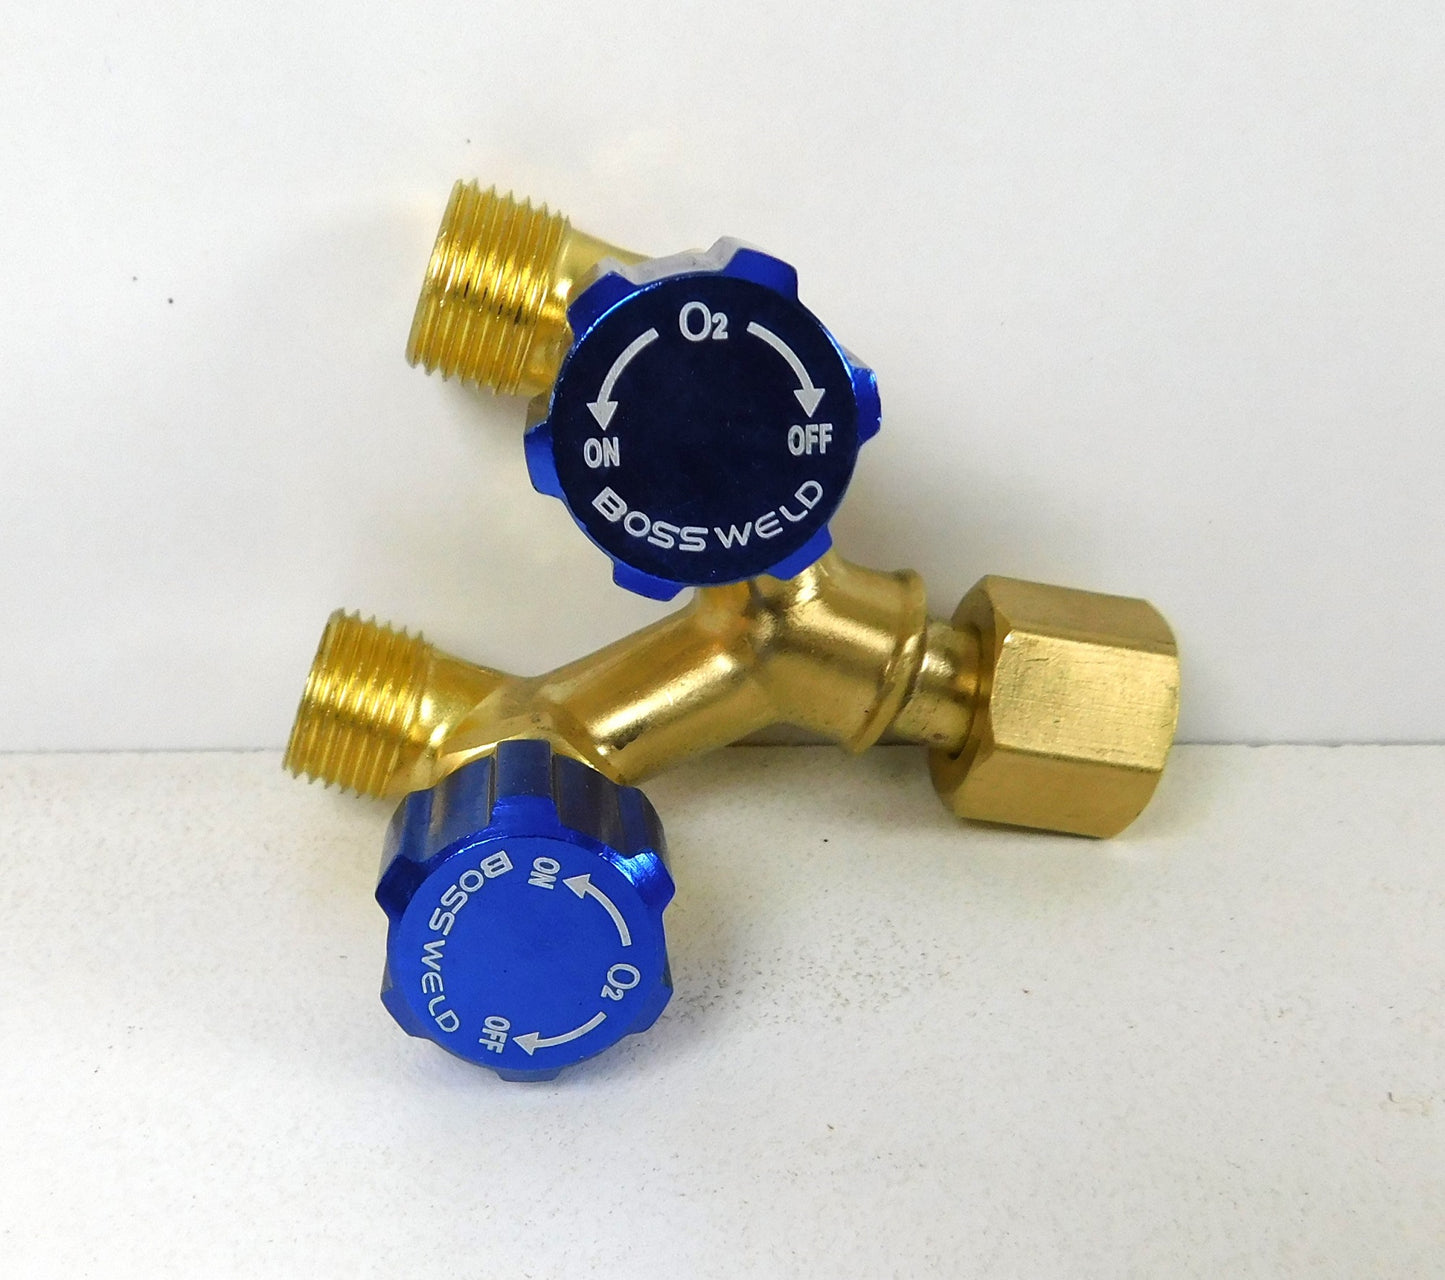 Twin Hose Joiner "Y" connector RH (Oxygen or Argon) With Taps 400195